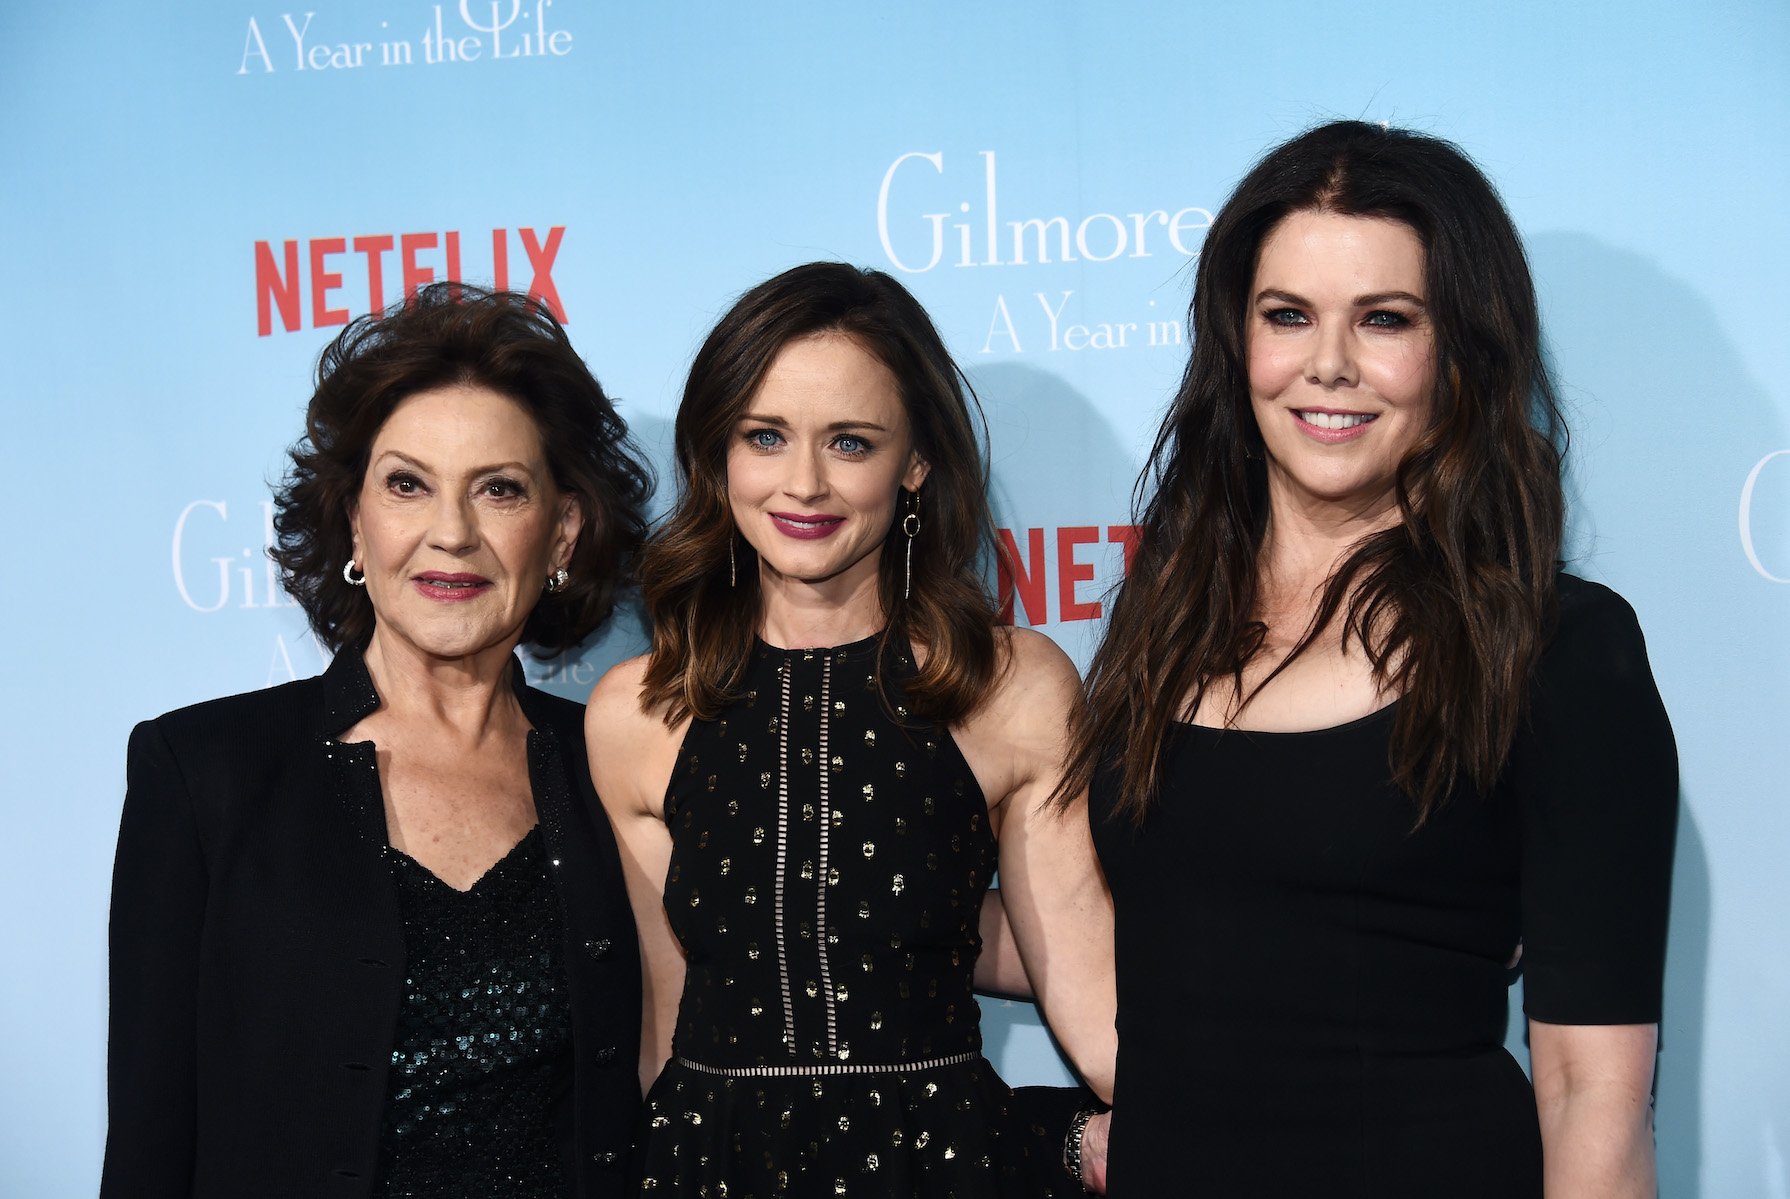 Kelly Bishop, Alexis Bledel, and Lauren Graham at the premiere of Netflix's 'Gilmore Girls: A Year in the Life'